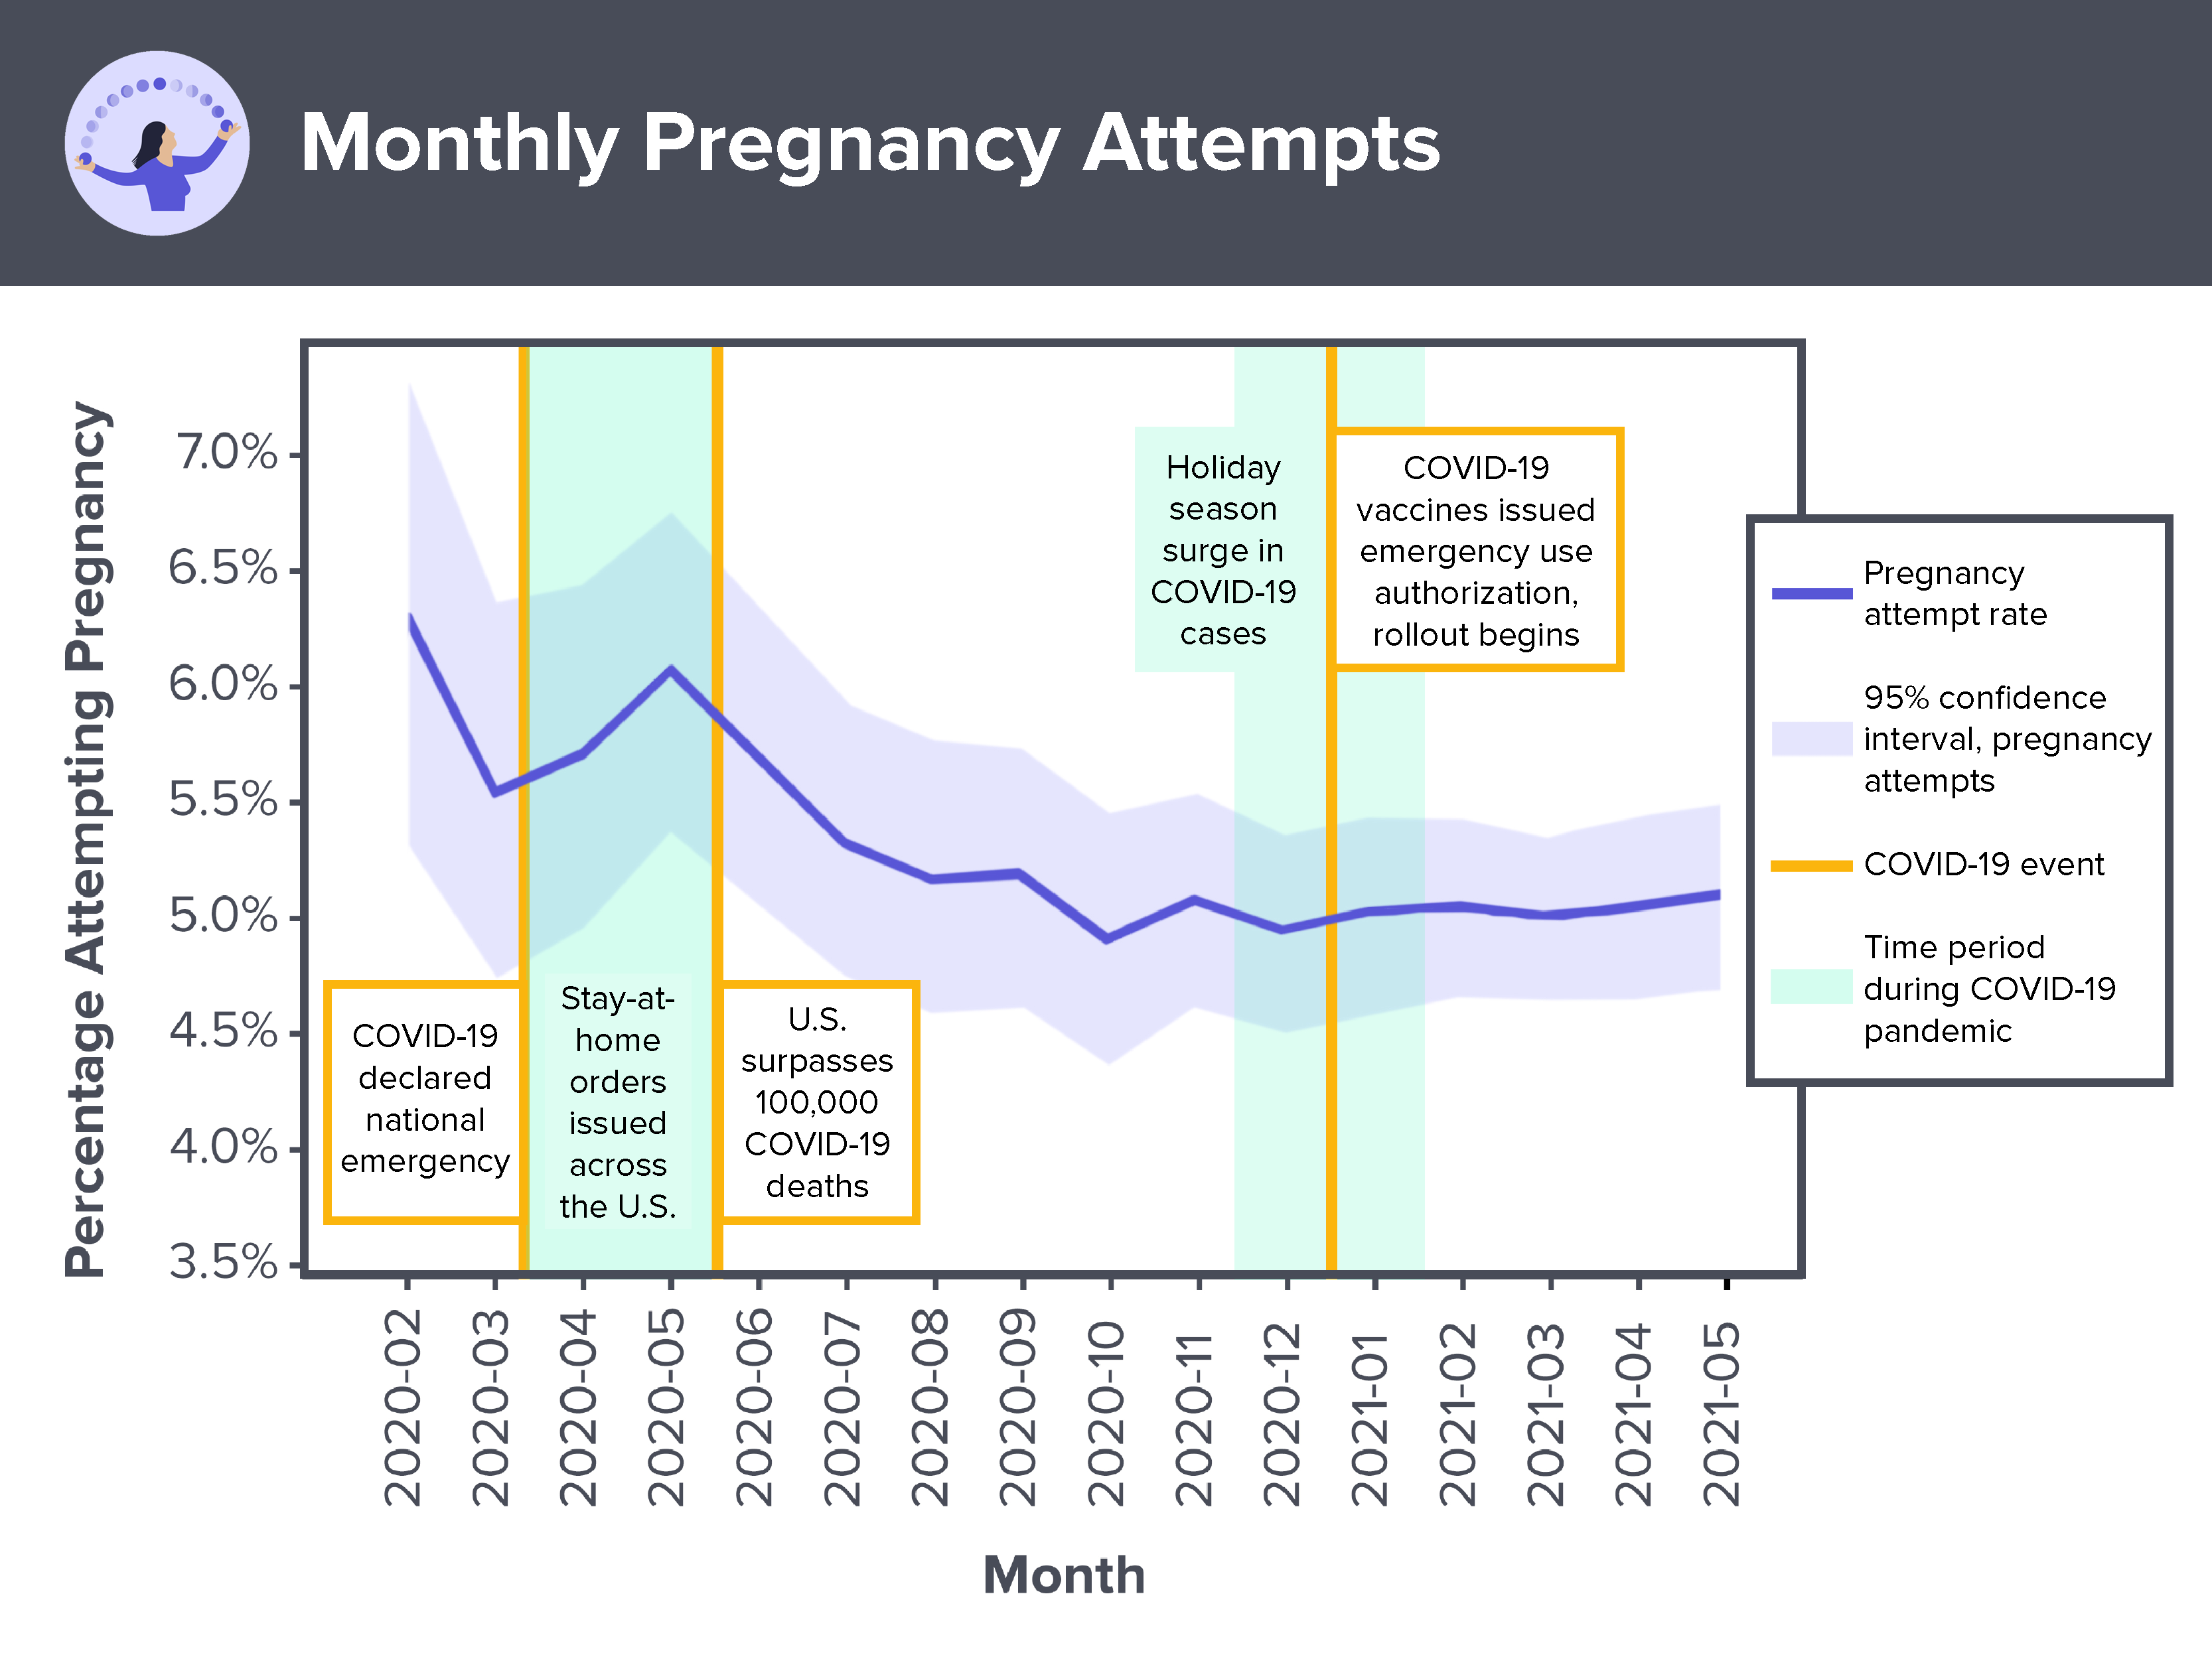 Line graph of monthly pregnancy attempts from February 2020 through May 2021.